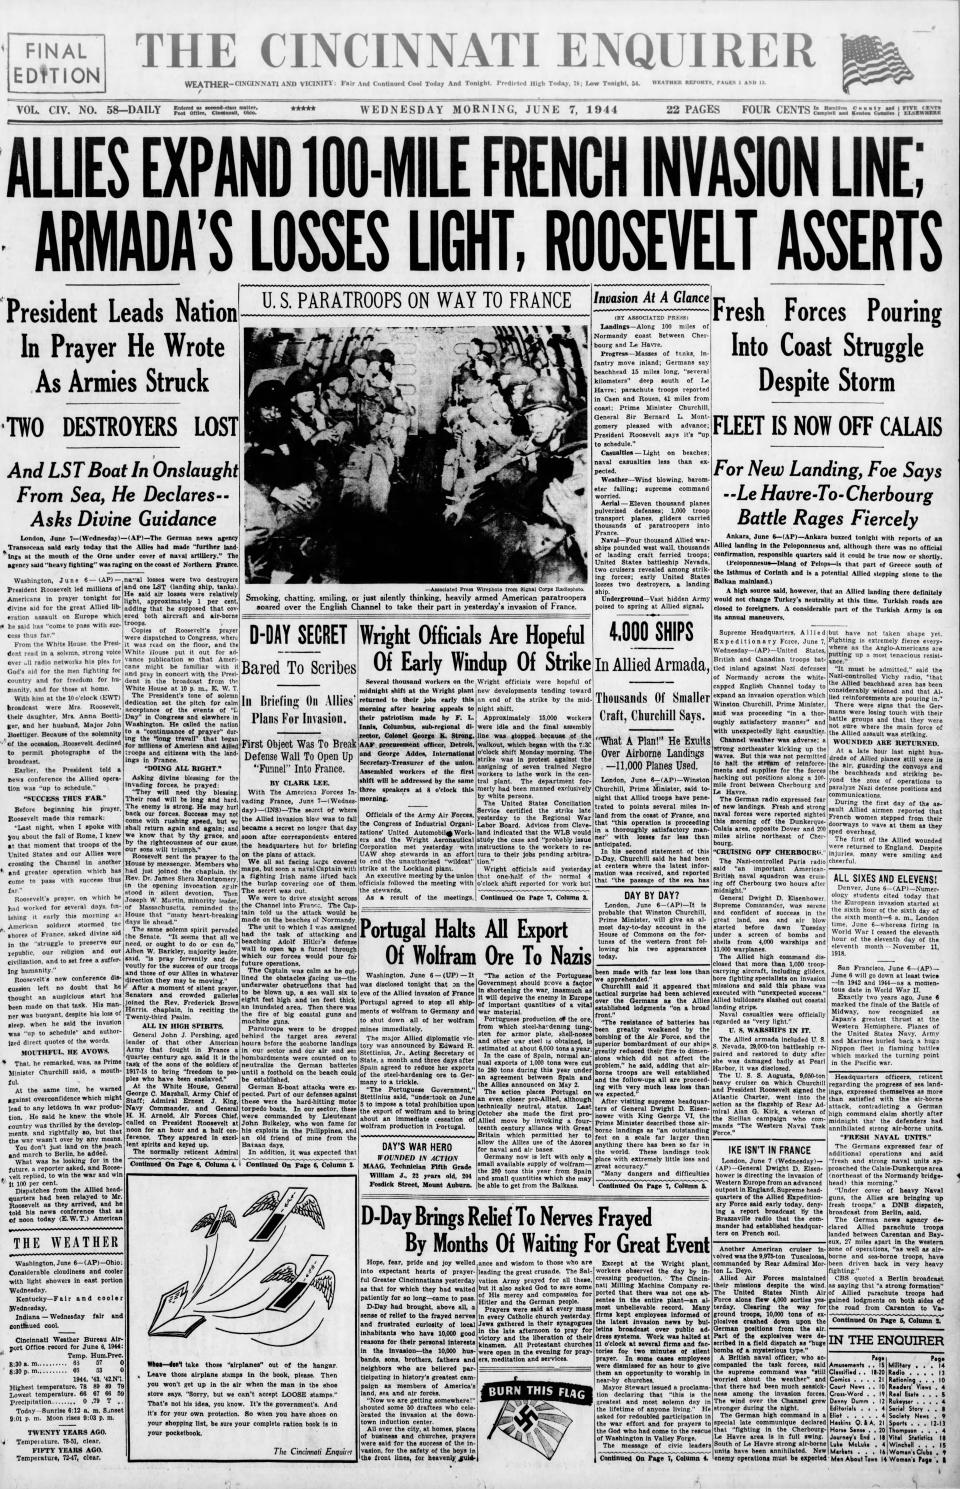 The Cincinnti Enquirer front page from June 7, 1944. Reporting on the D-Day invasion in France during World War II.